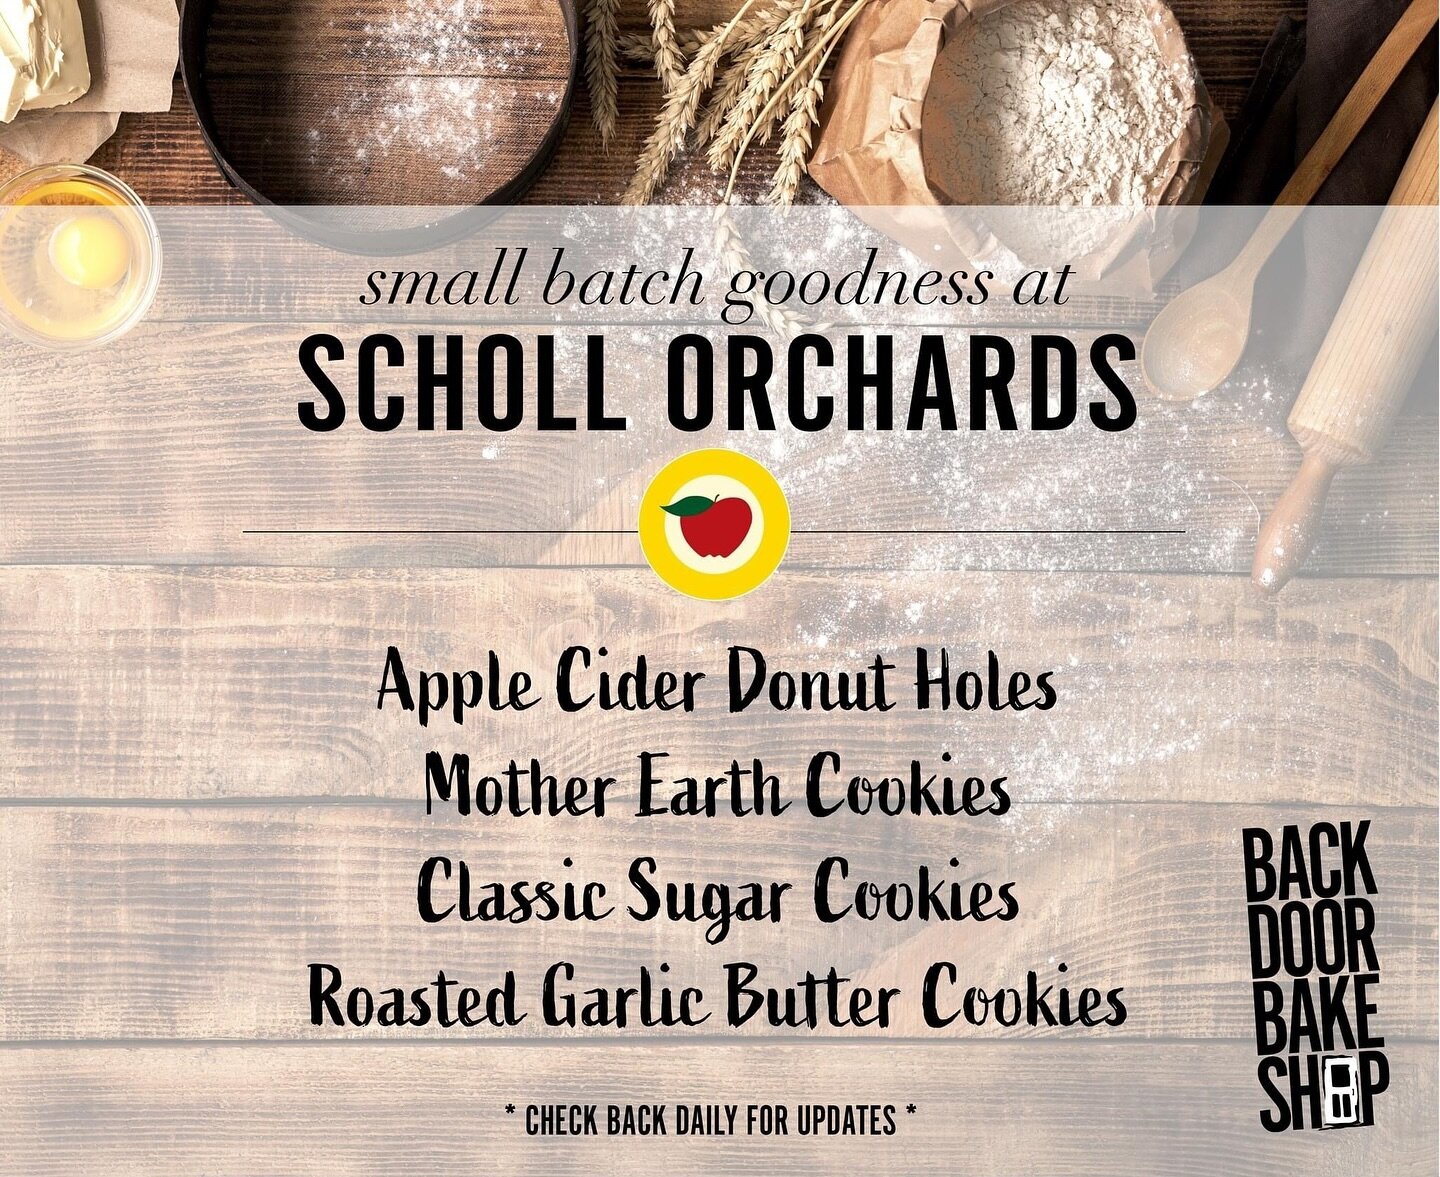 Thu-Sat at @schollorchards 
- Apple Cider Donut Holes
- Mother Earth Cookies
- Classic Sugar Cookies
- Roasted Garlic Butter Cookies